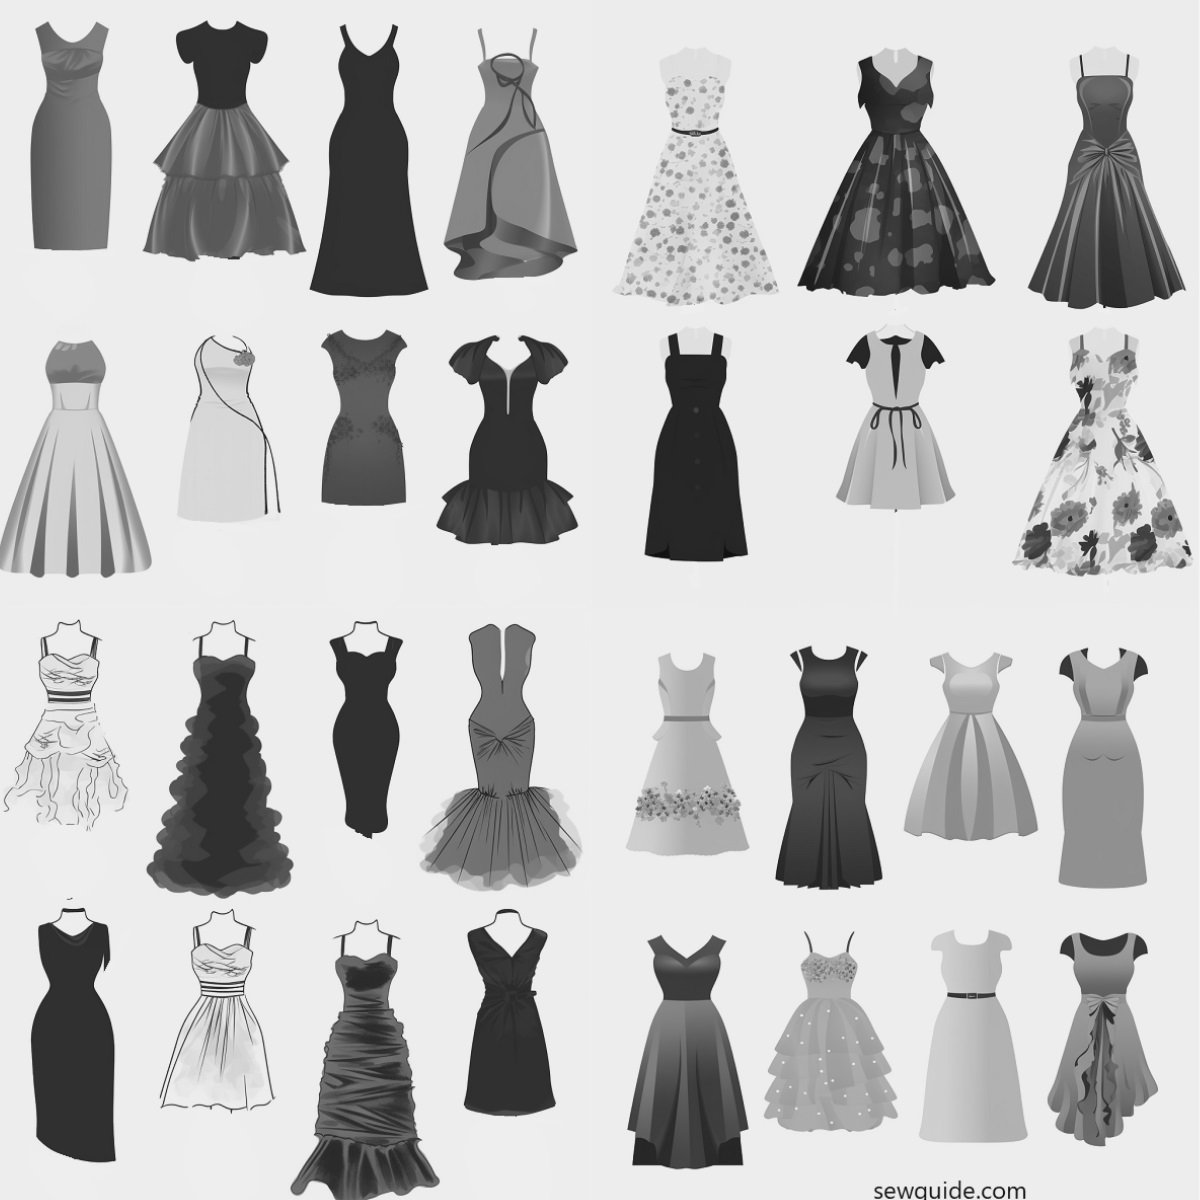 dress silhouettes for cocktail attire for females